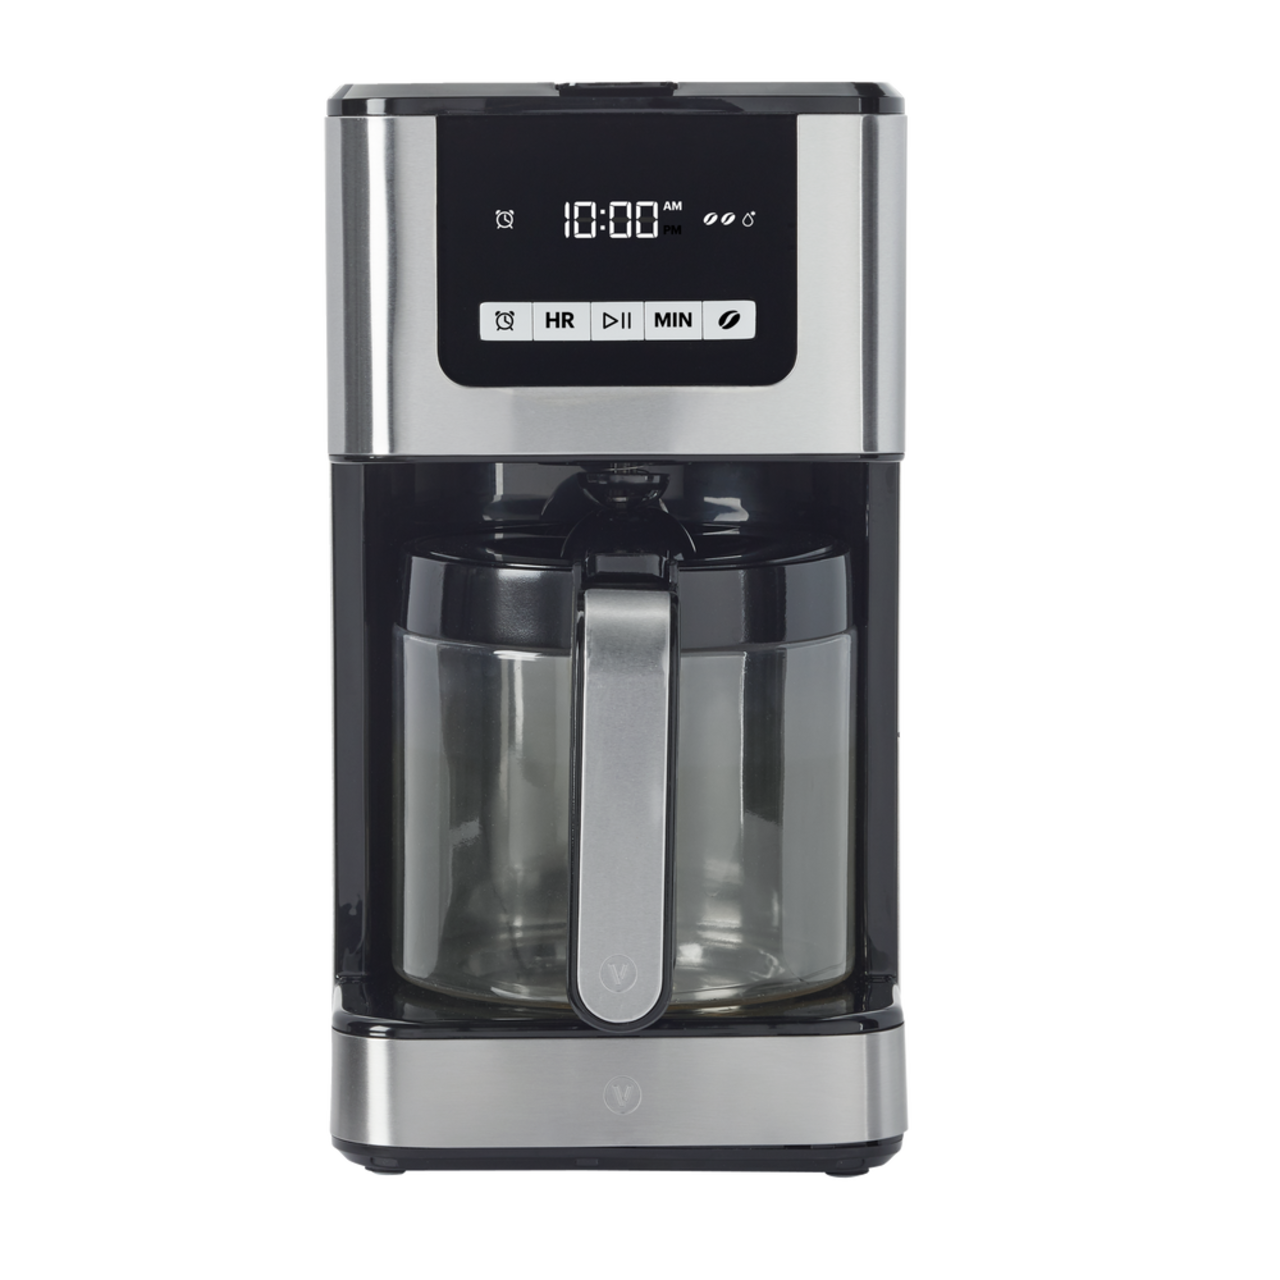 https://media-www.canadiantire.ca/product/living/kitchen/kitchen-appliances/0430766/vida-12cup-coffee-maker-stainless-88d5fad3-6971-446d-a6c9-bdfafedf63b8.png?imdensity=1&imwidth=1244&impolicy=mZoom